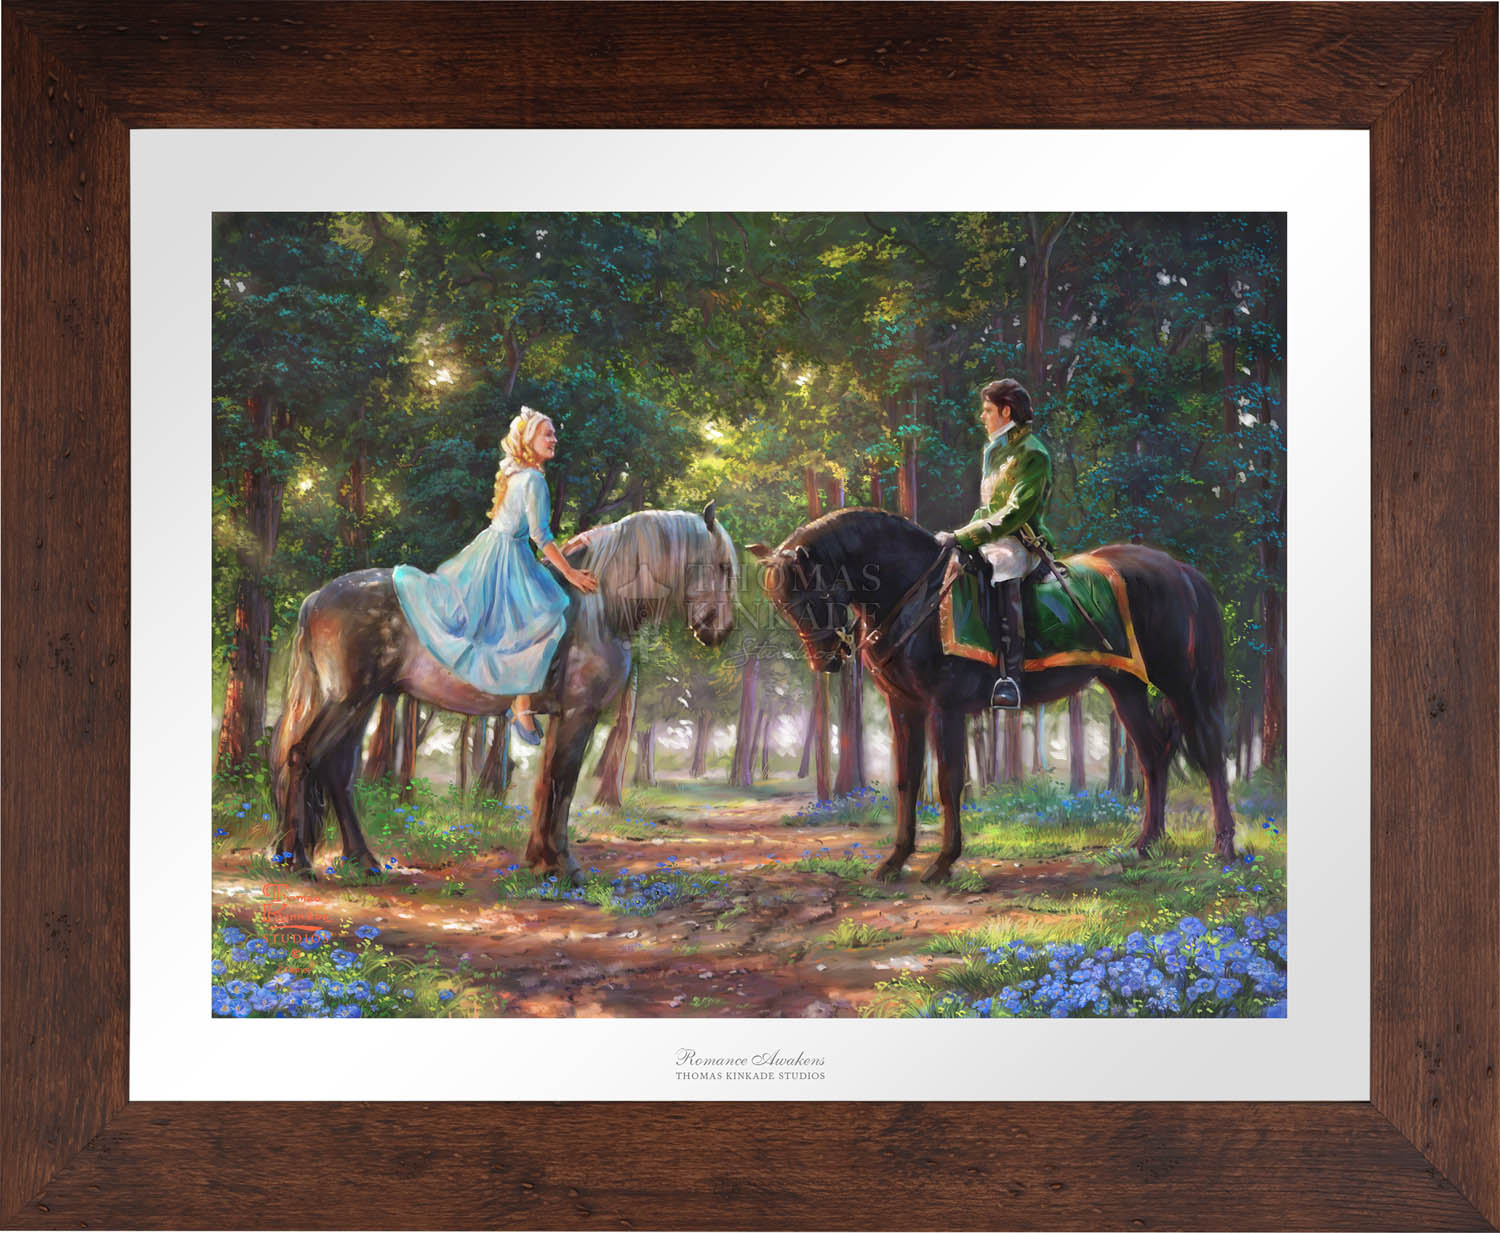 Cinderella-Ella meets "The Prince" for the first time. The two happen to meet in the forest as The Prince is on a stag hunt, and Ella is on a ride of her own. - Wildwood Frame